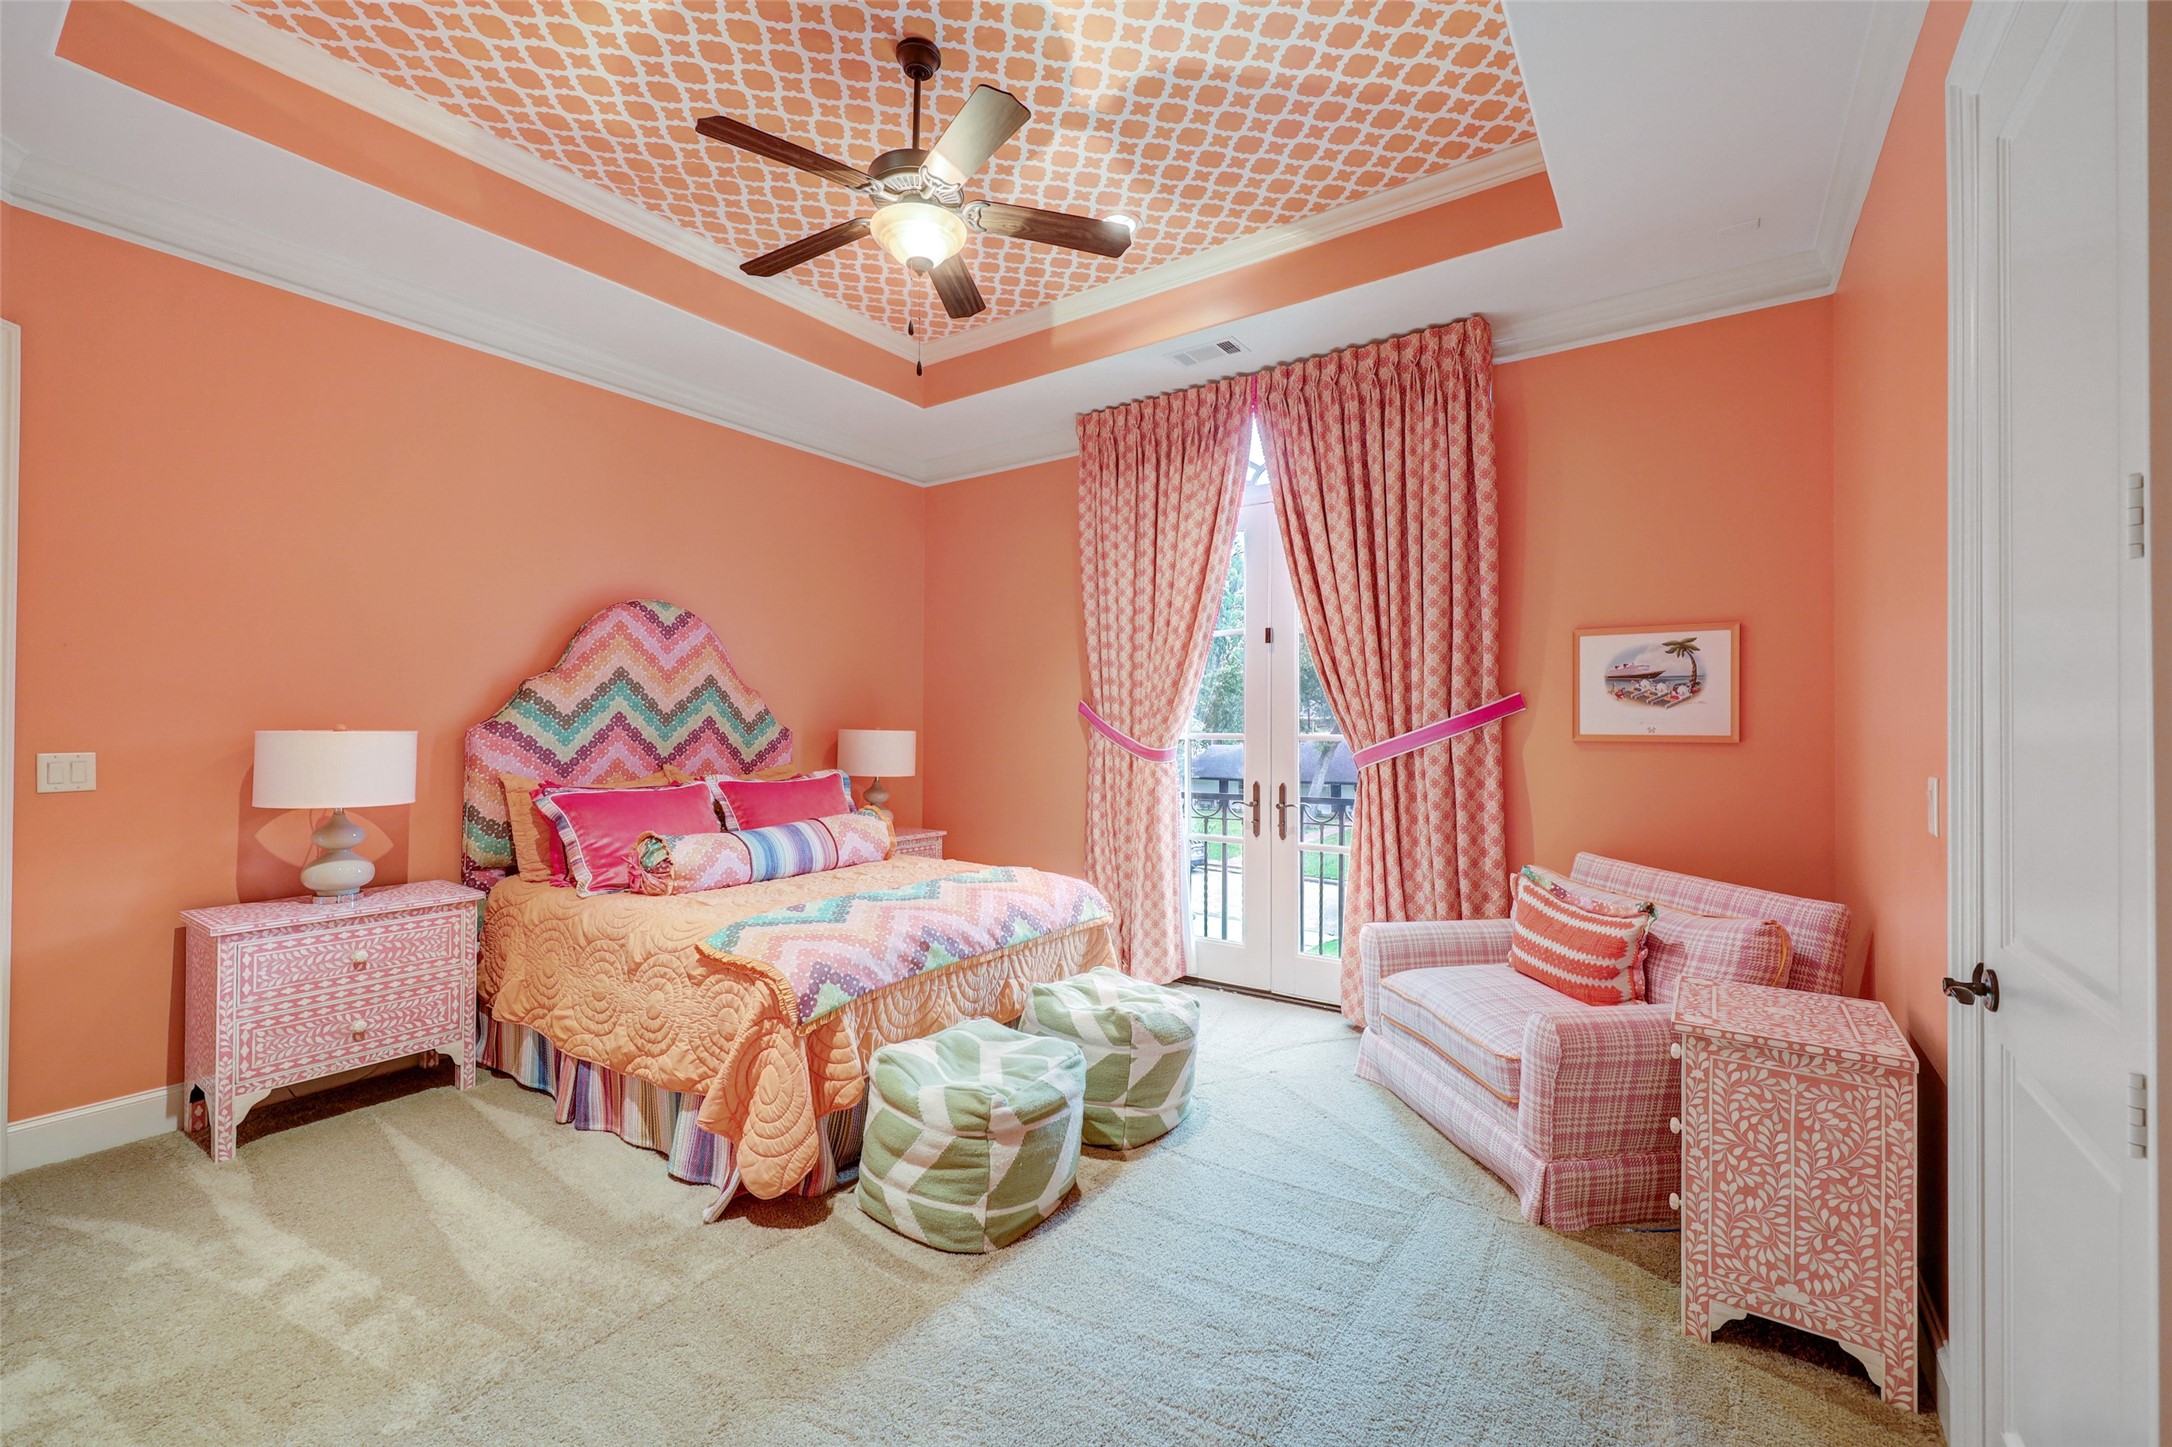 Guest Suite Three is awash in vivid colors and patterns. This Suite also features a cove ceiling, crown moulding, a walk in closet AND French doors that open to a Juliet balcony that overlooks the driveway--a perfect spot for your 